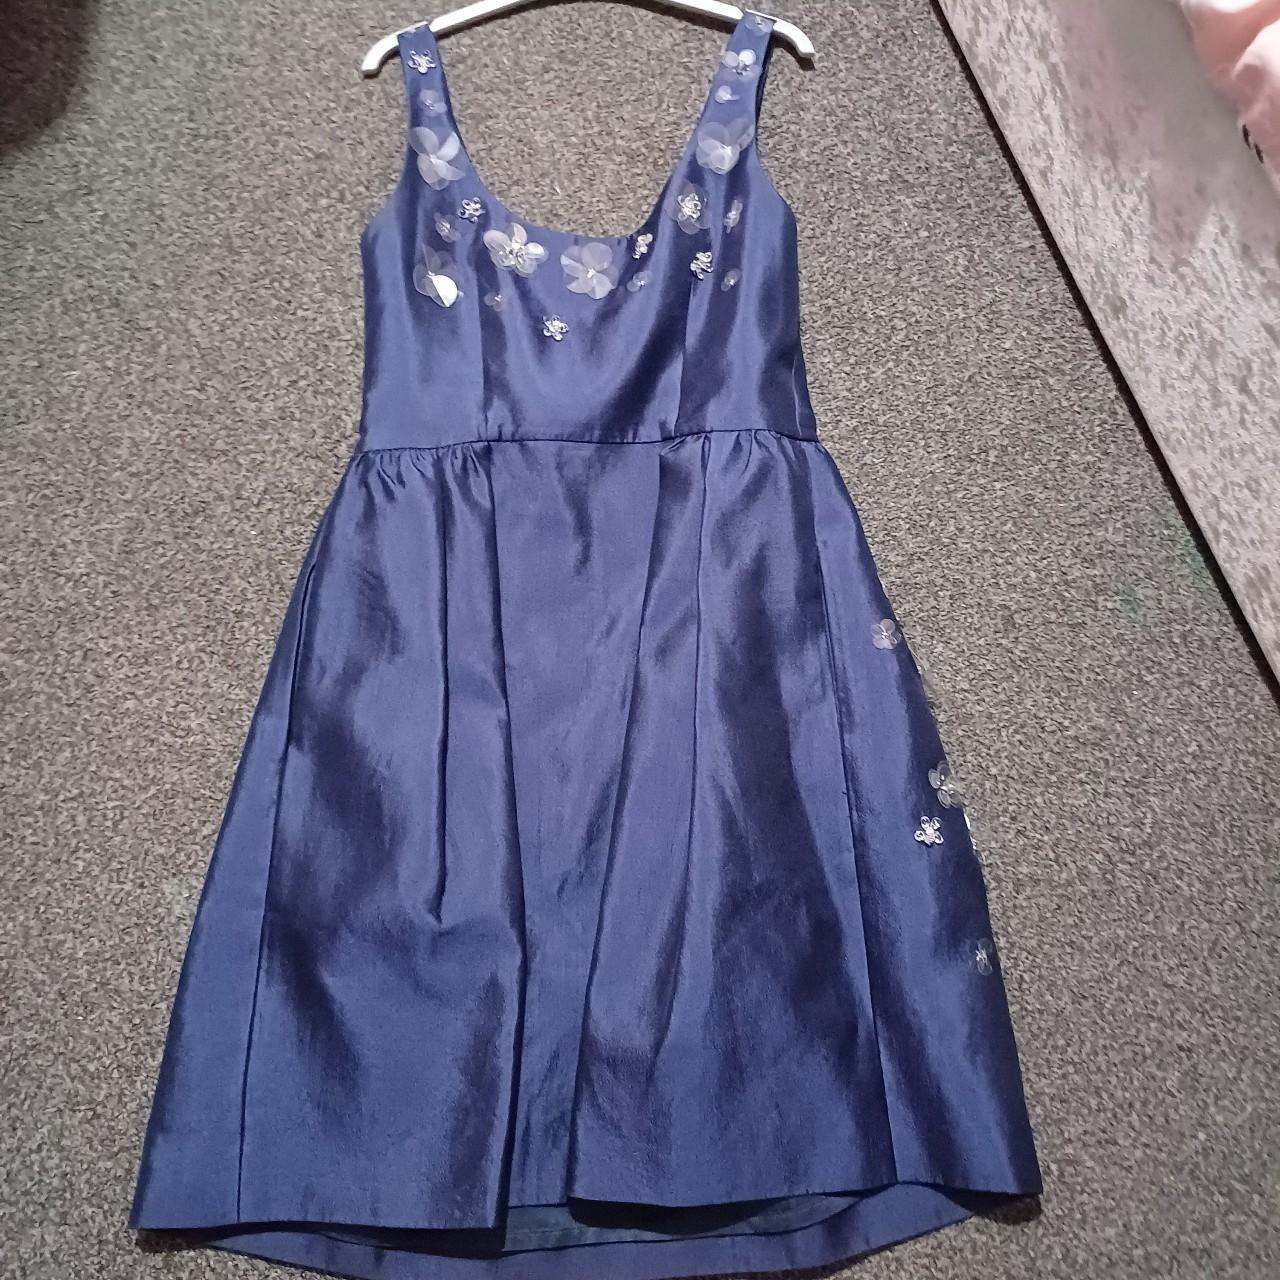 coast blue dress brand new only worn to try on no... - Depop